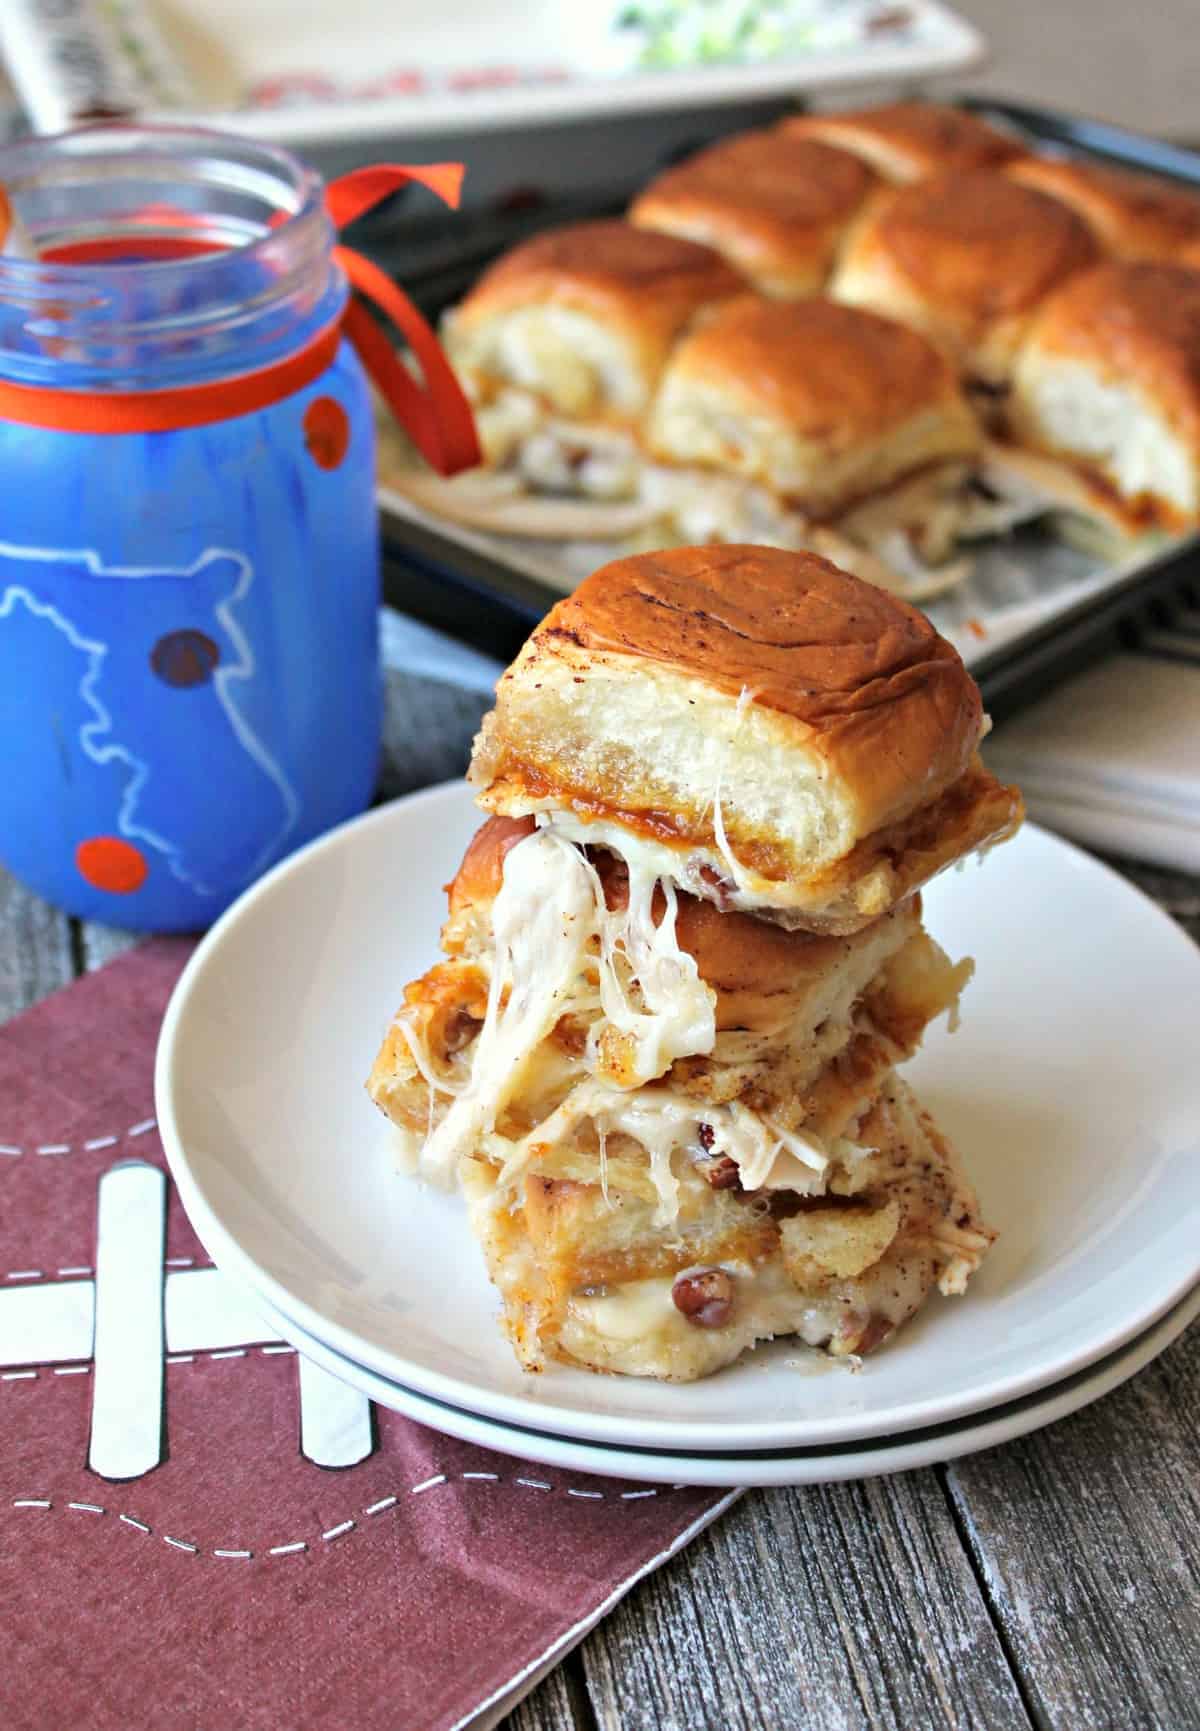 Baked Pumpkin Butter Turkey & Cheese Sliders. The ultimate bite of fall flavors: Pumpkin butter, turkey, pecans & melted cheese baked to buttery perfection!